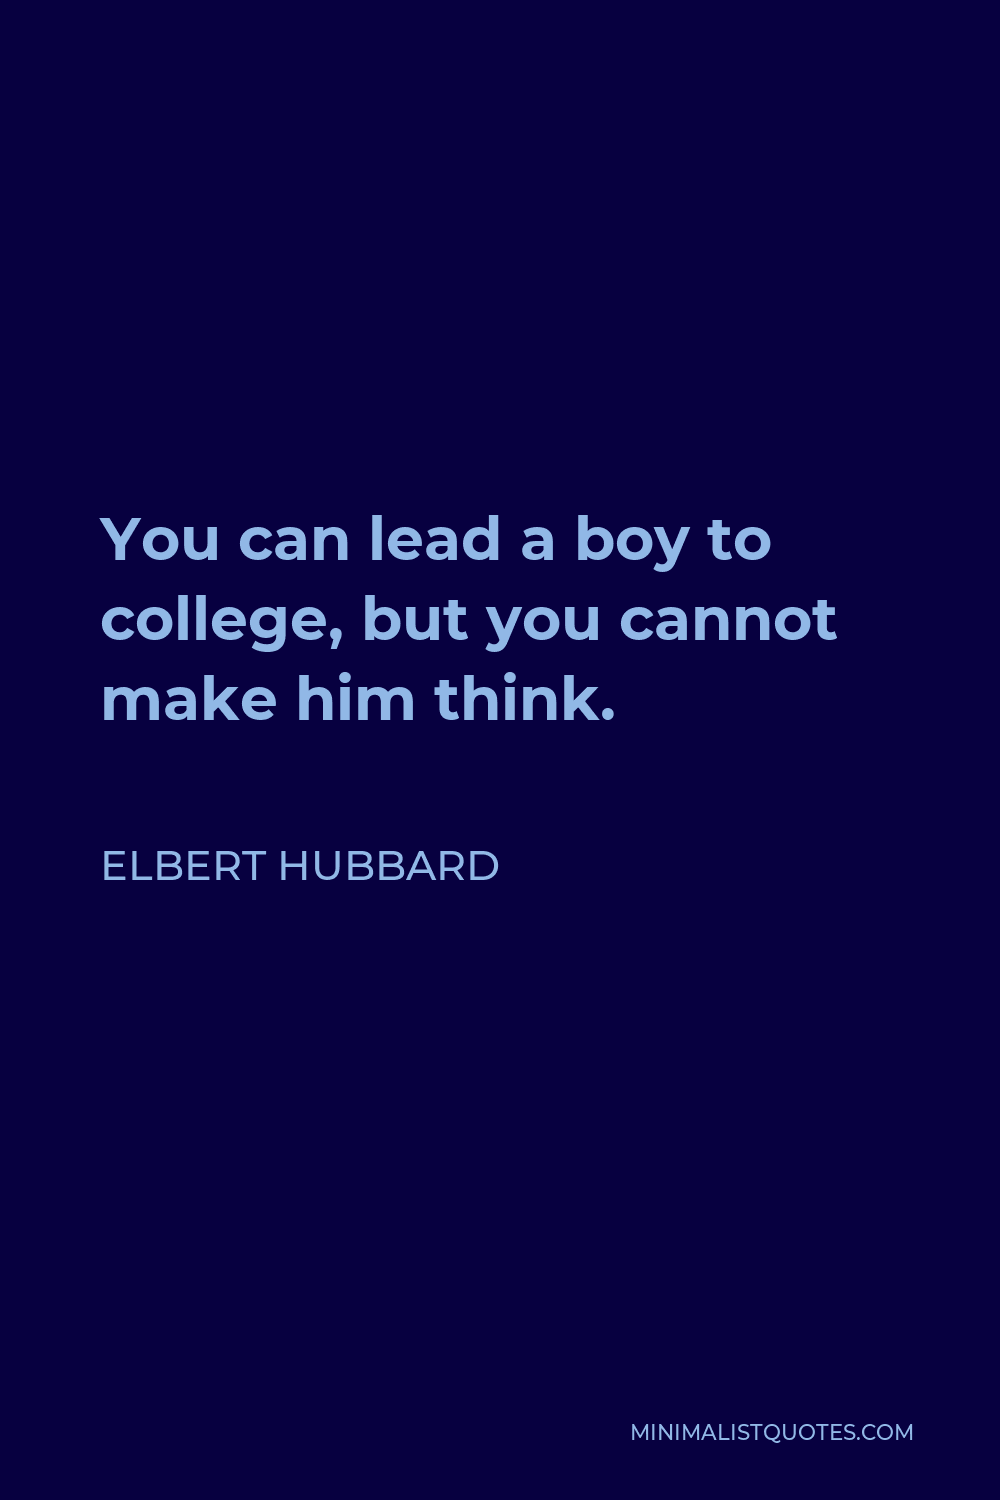 Elbert Hubbard Quote - You can lead a boy to college, but you cannot make him think.